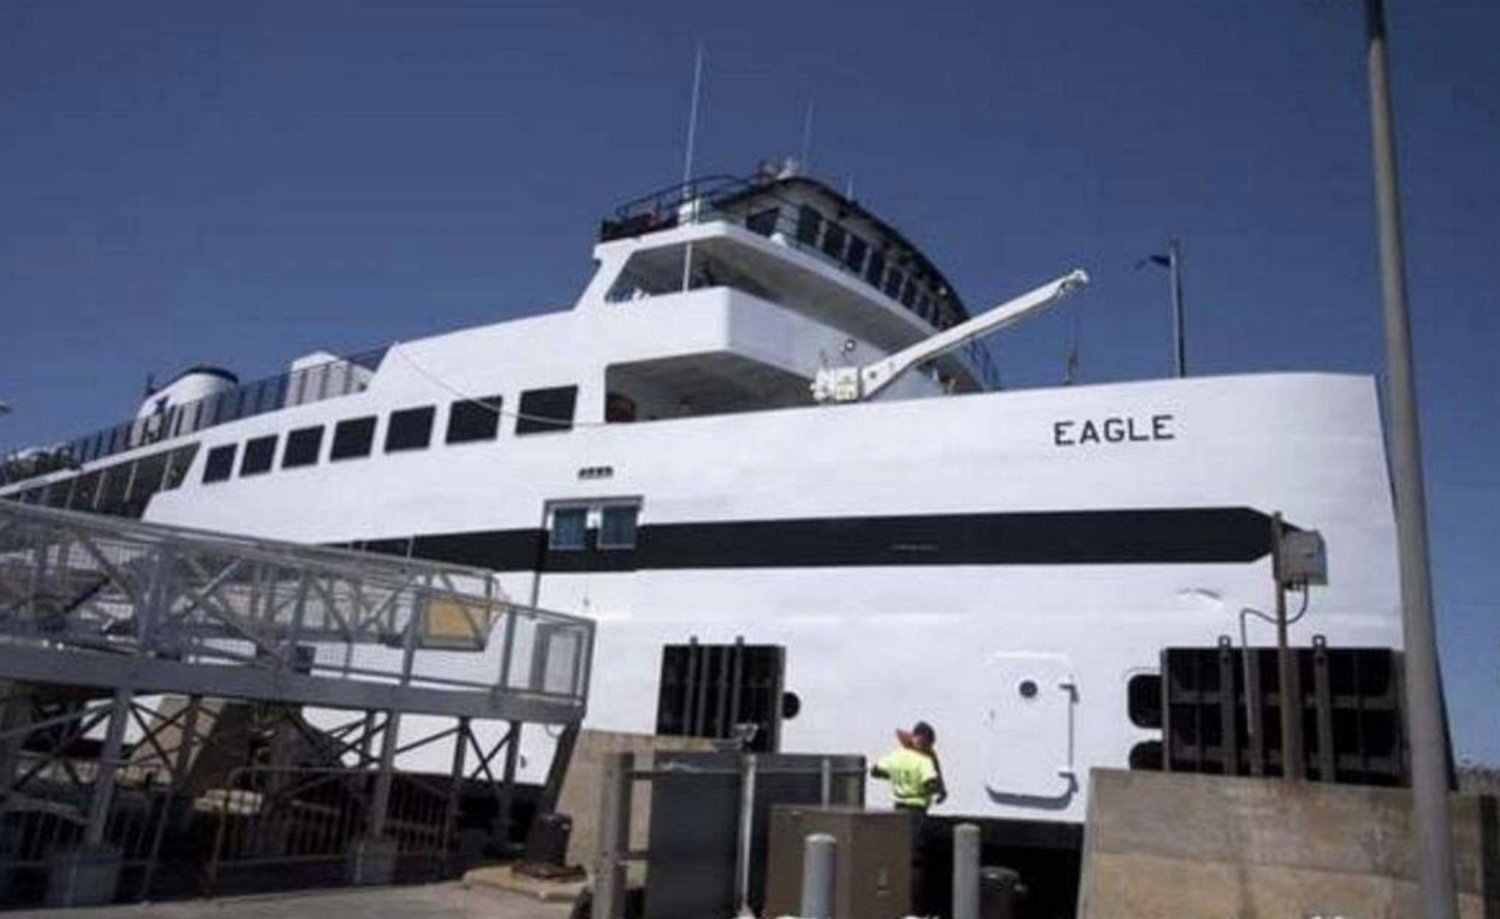 The Steamship Authority's M/V Eagle.